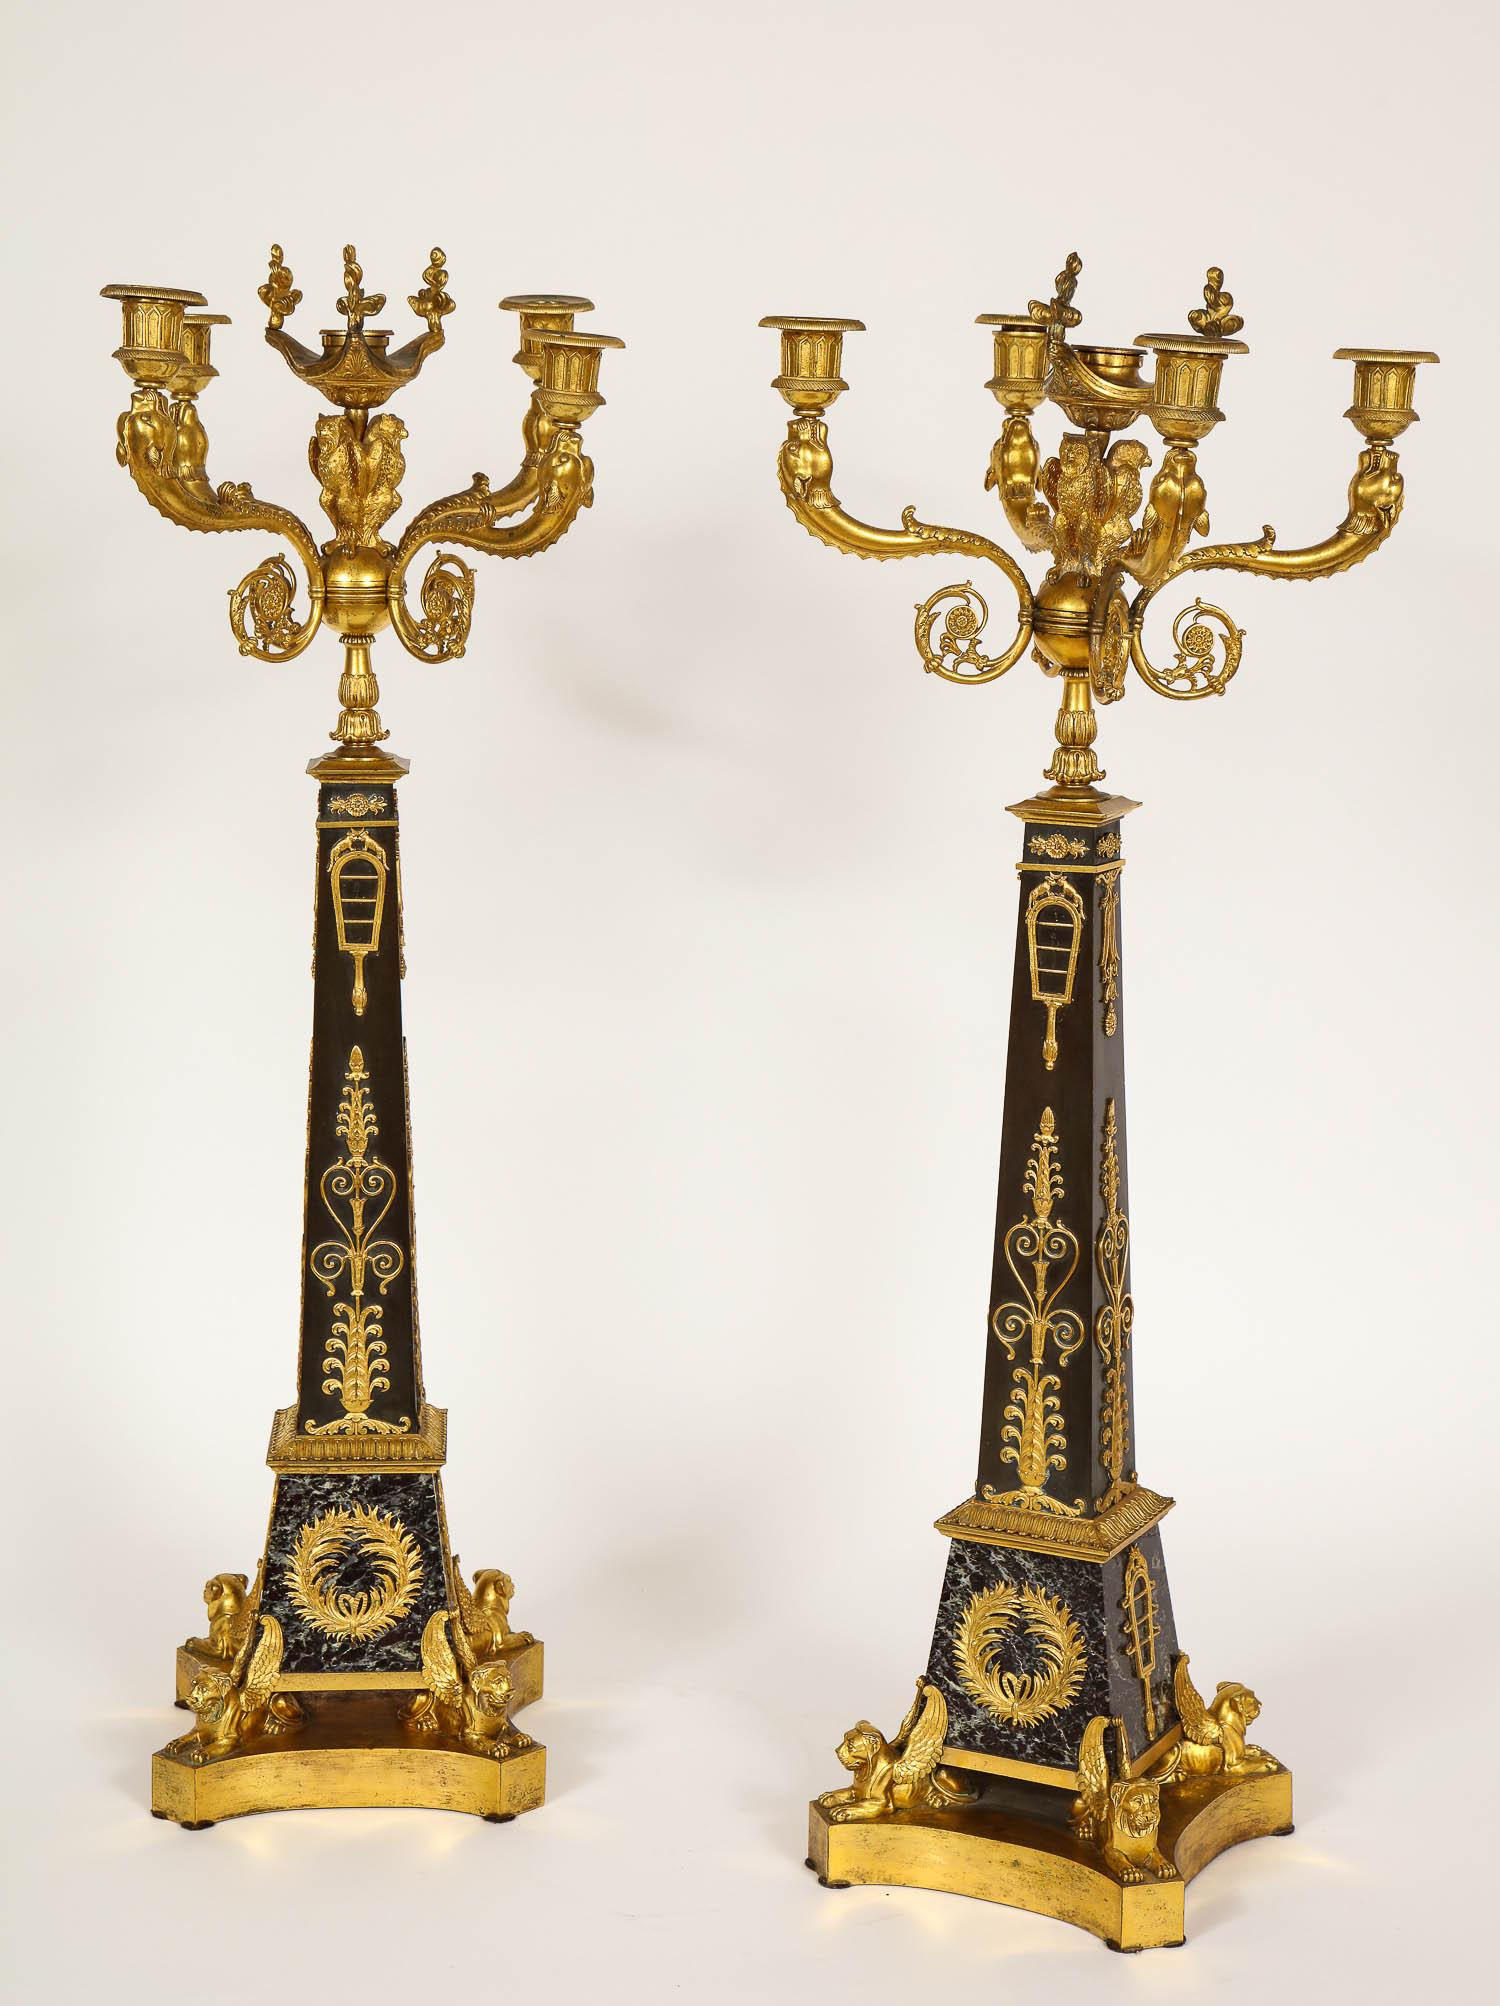 A magnificent large pair of five-light doré bronze and patinated bronze Empire period candelabra, attributed to Claude Galle made in the early 1800s. This pair of candelabra are set on Verde Antico marble base with ormolu mounts held up by gorgeous